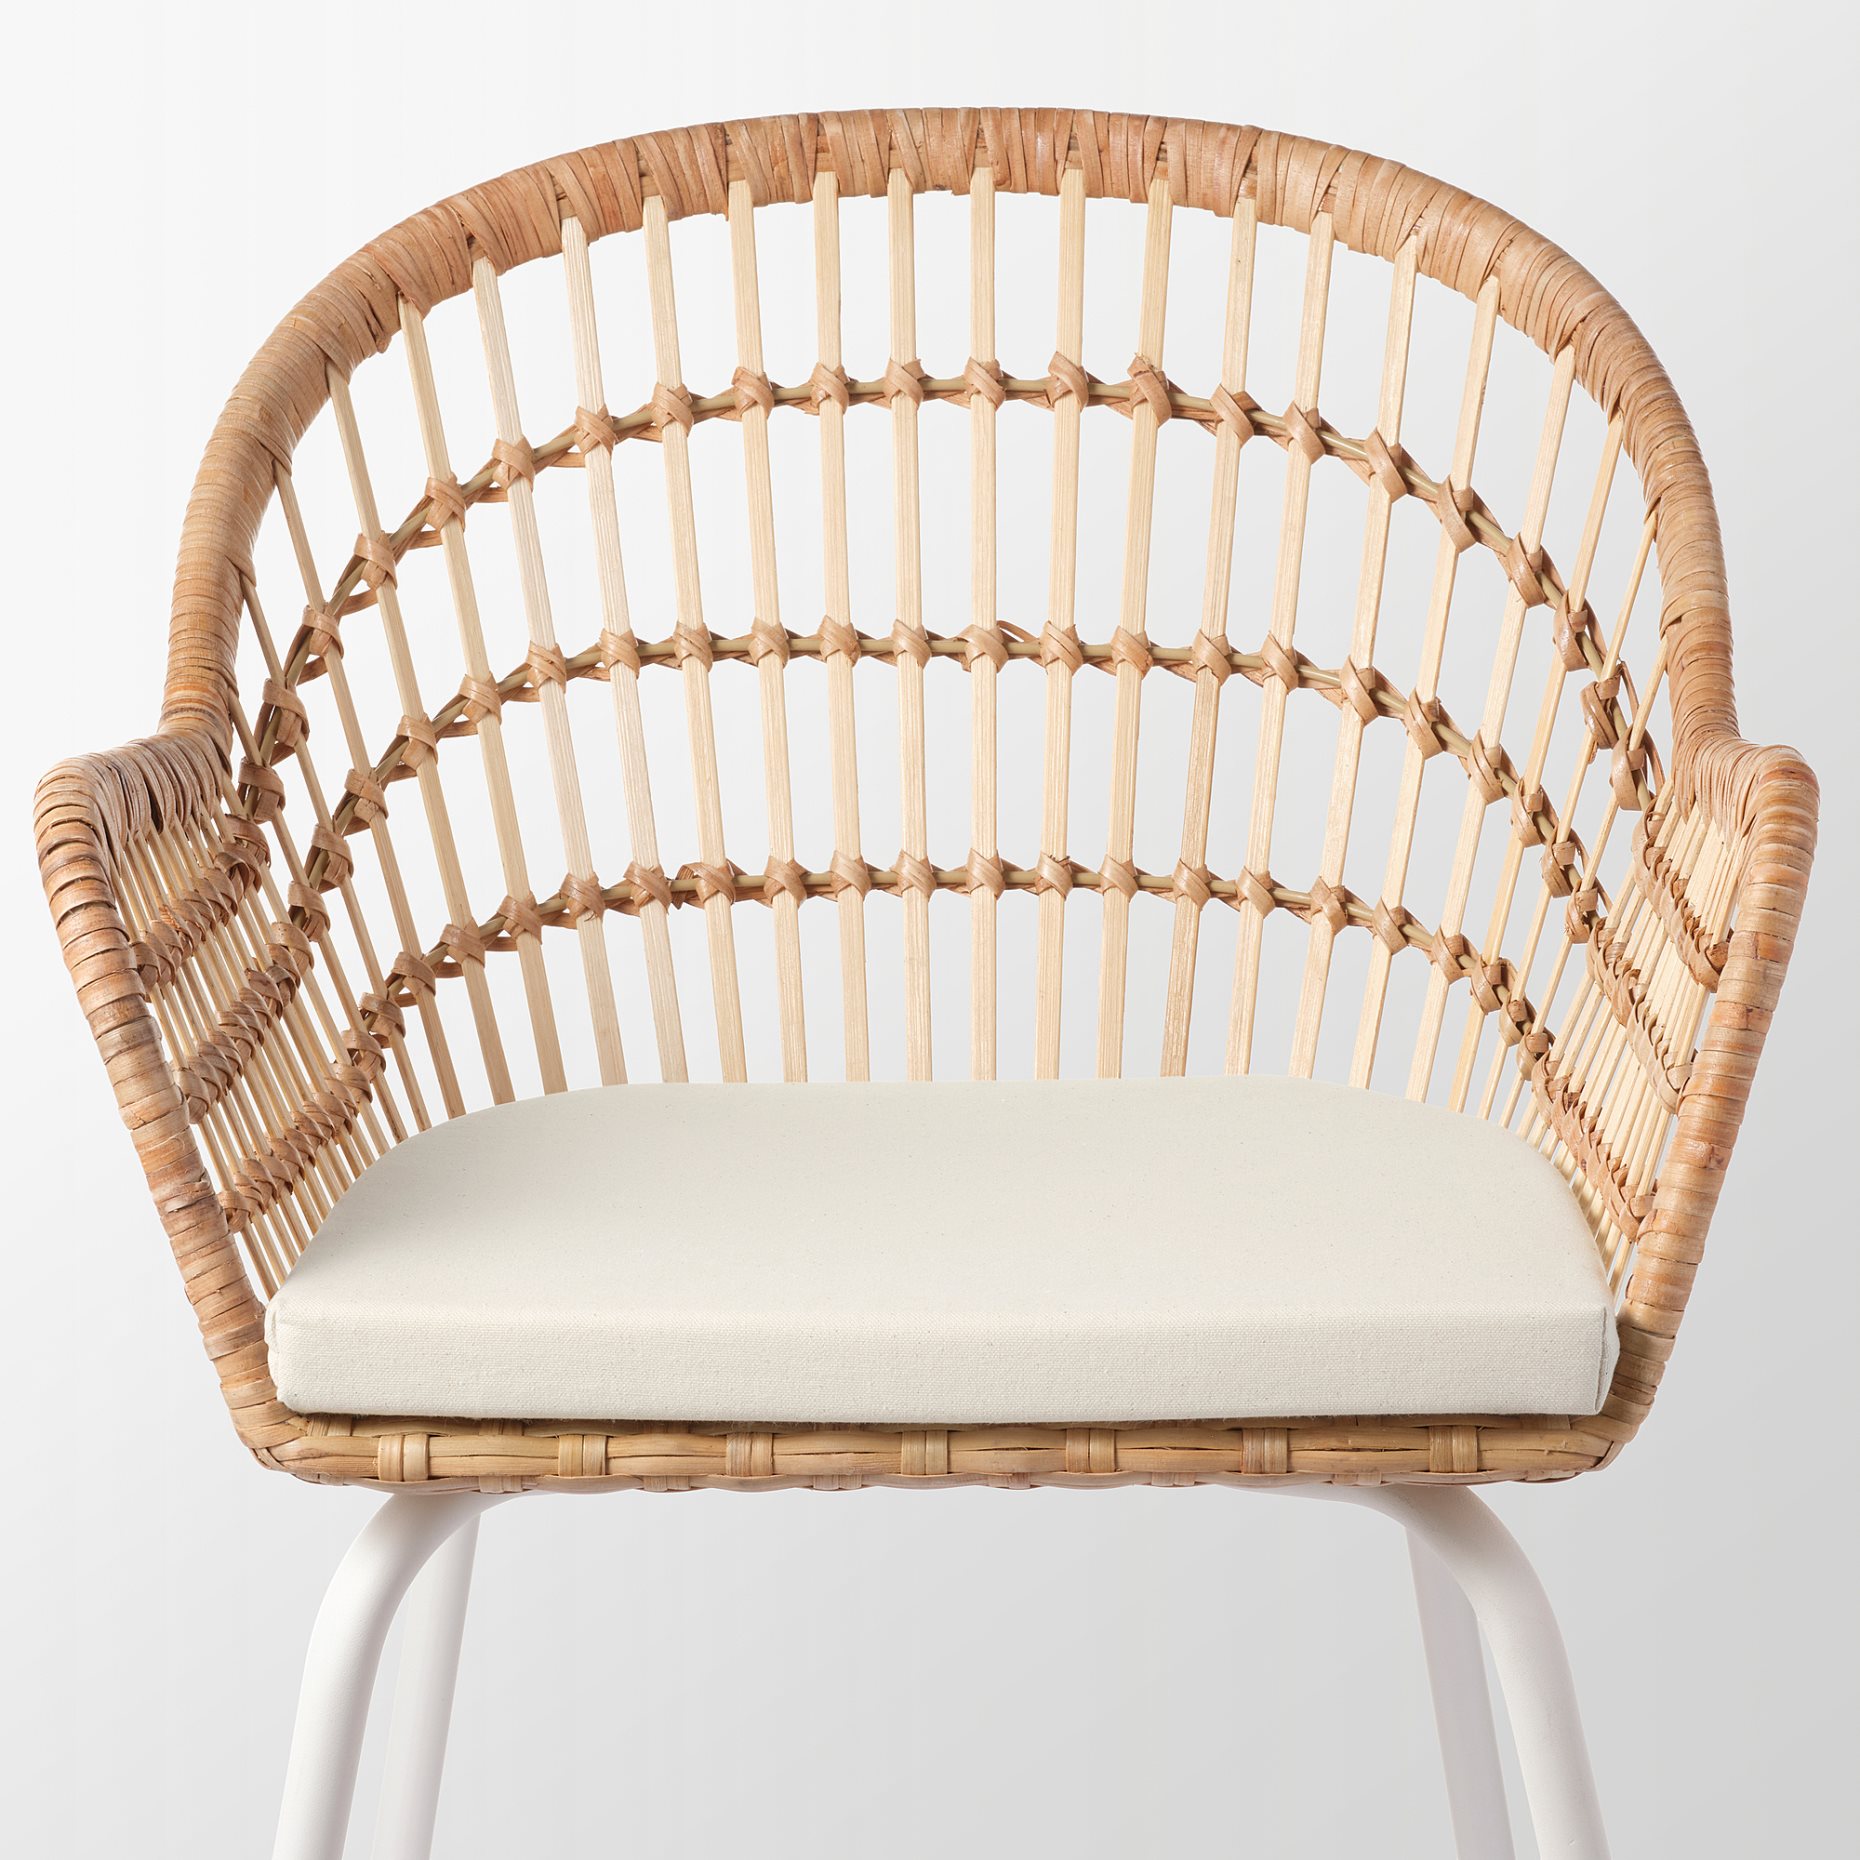 NILSOVE/NORNA, chair with armrests and chair pad, 193.040.06